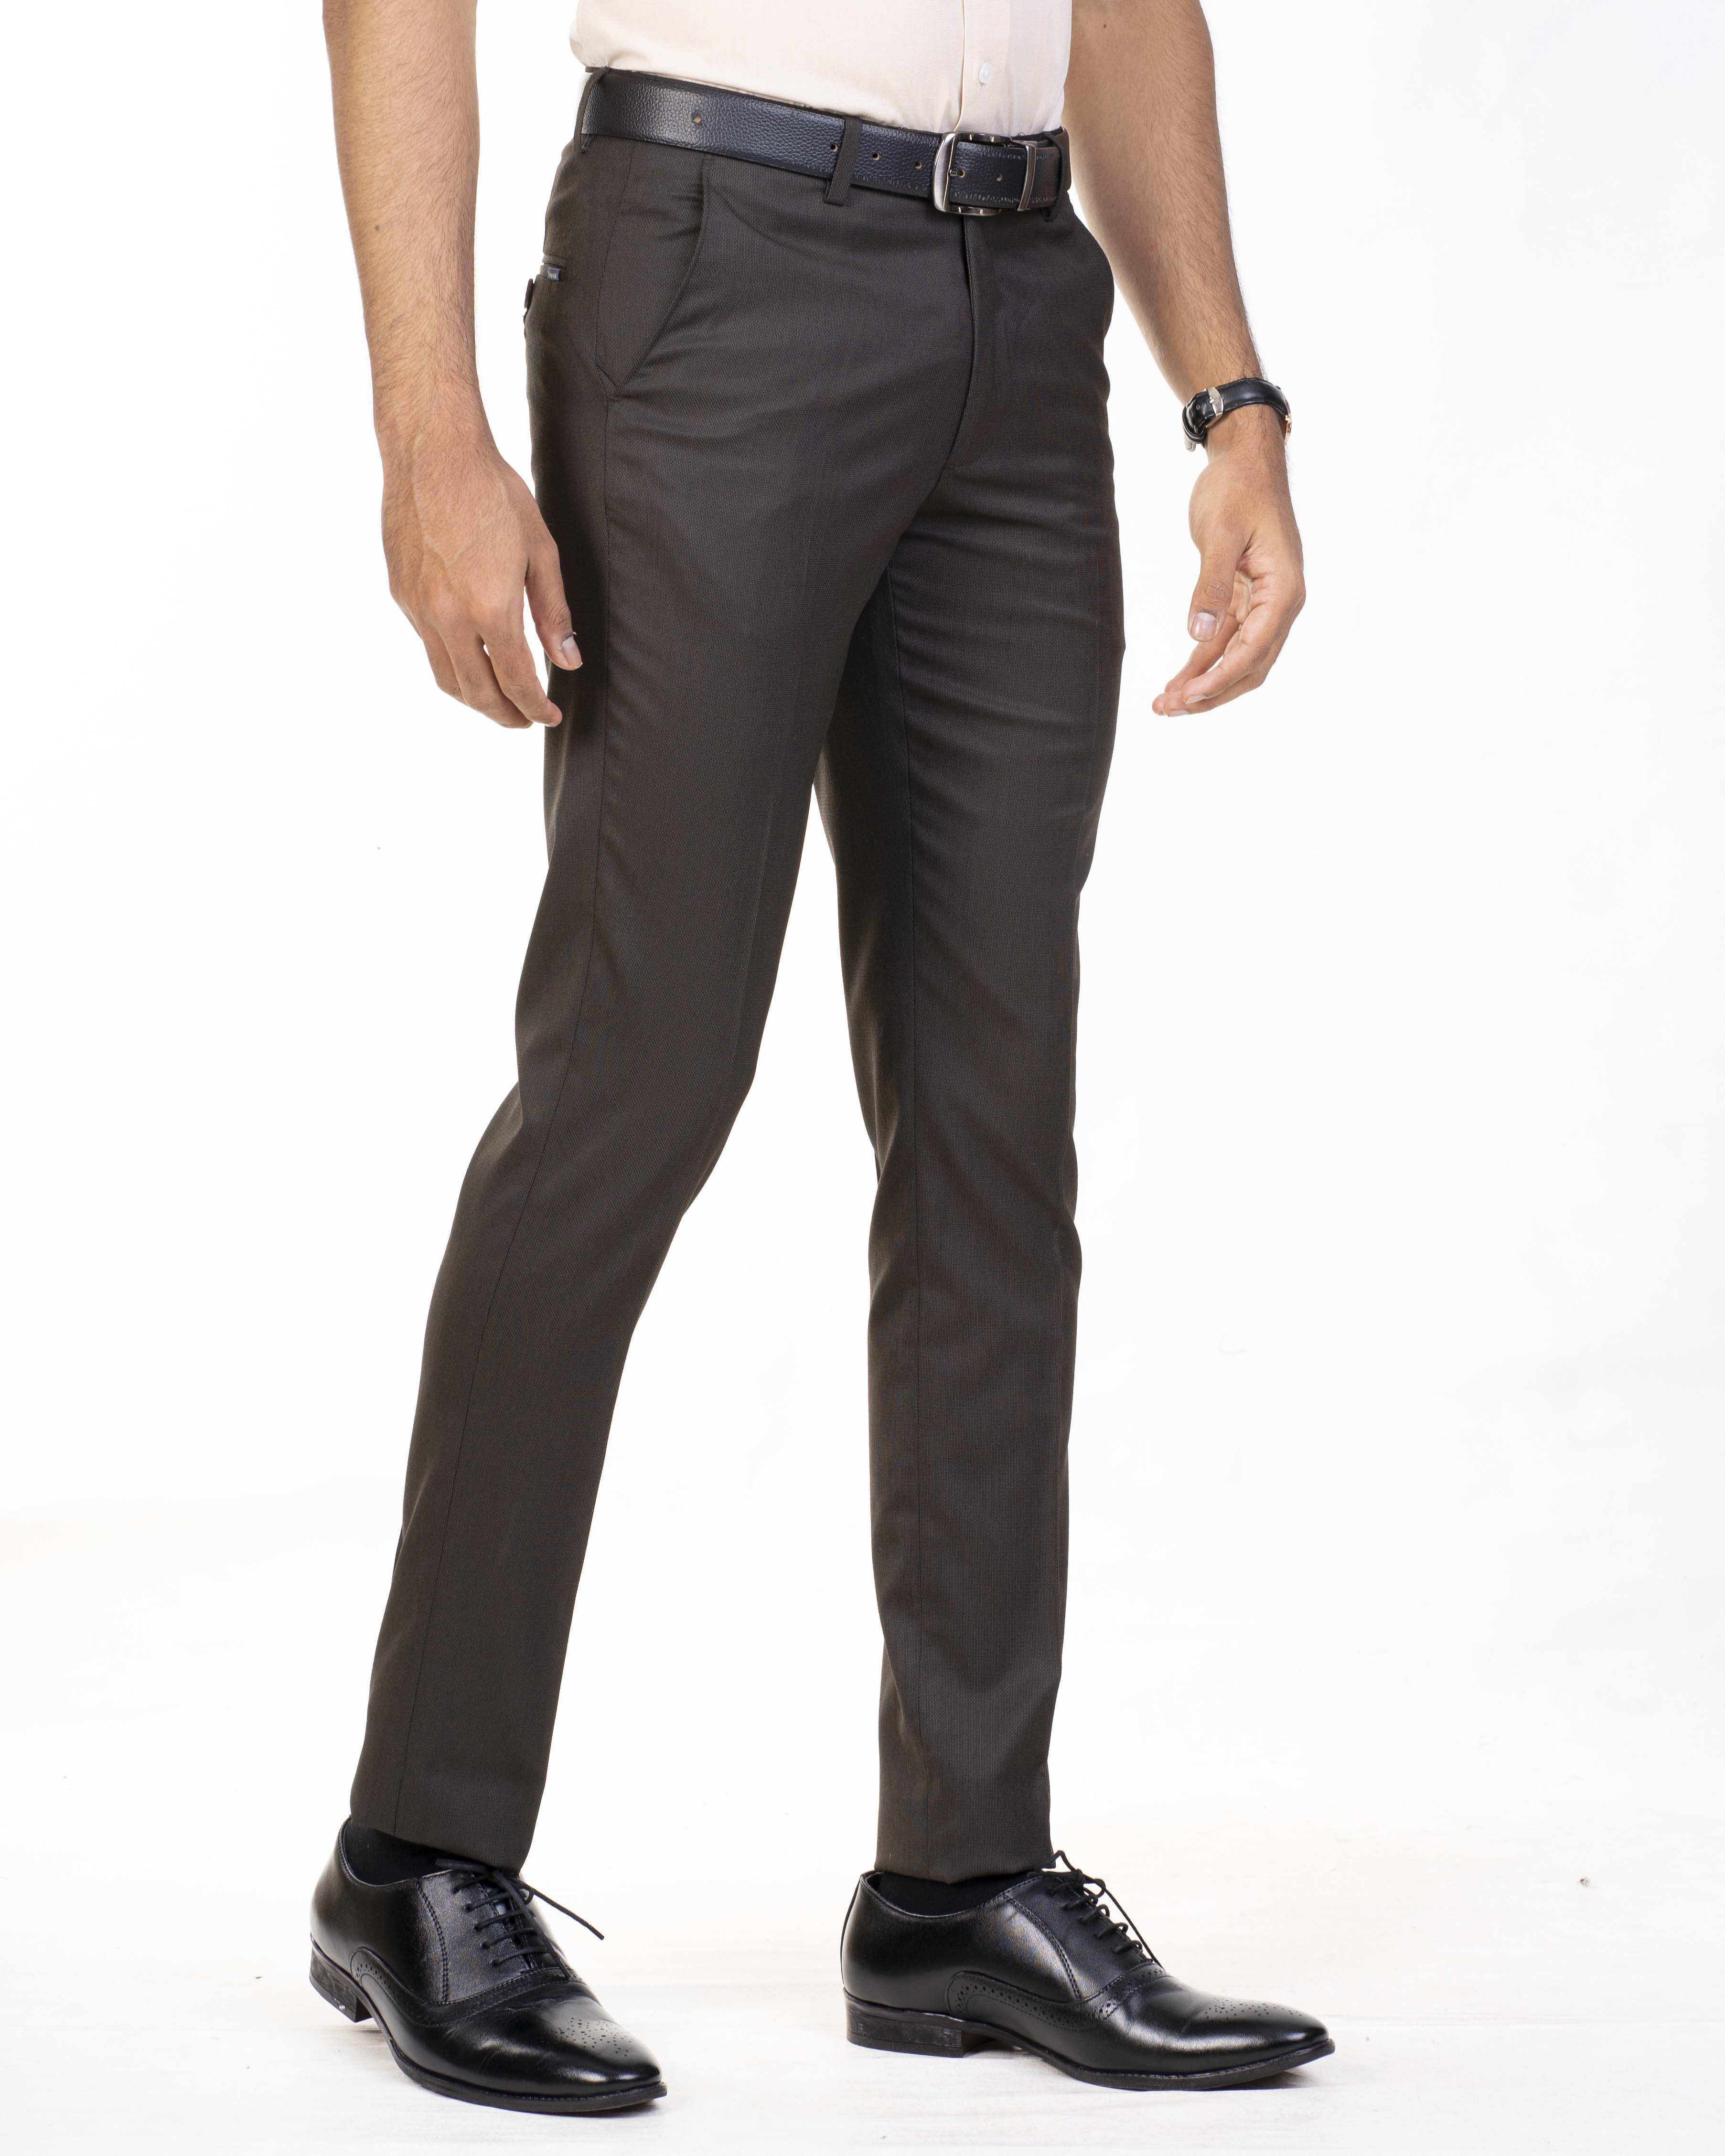 Emerald Trouser Dobby Class One Ultra Slim Fit-Brown